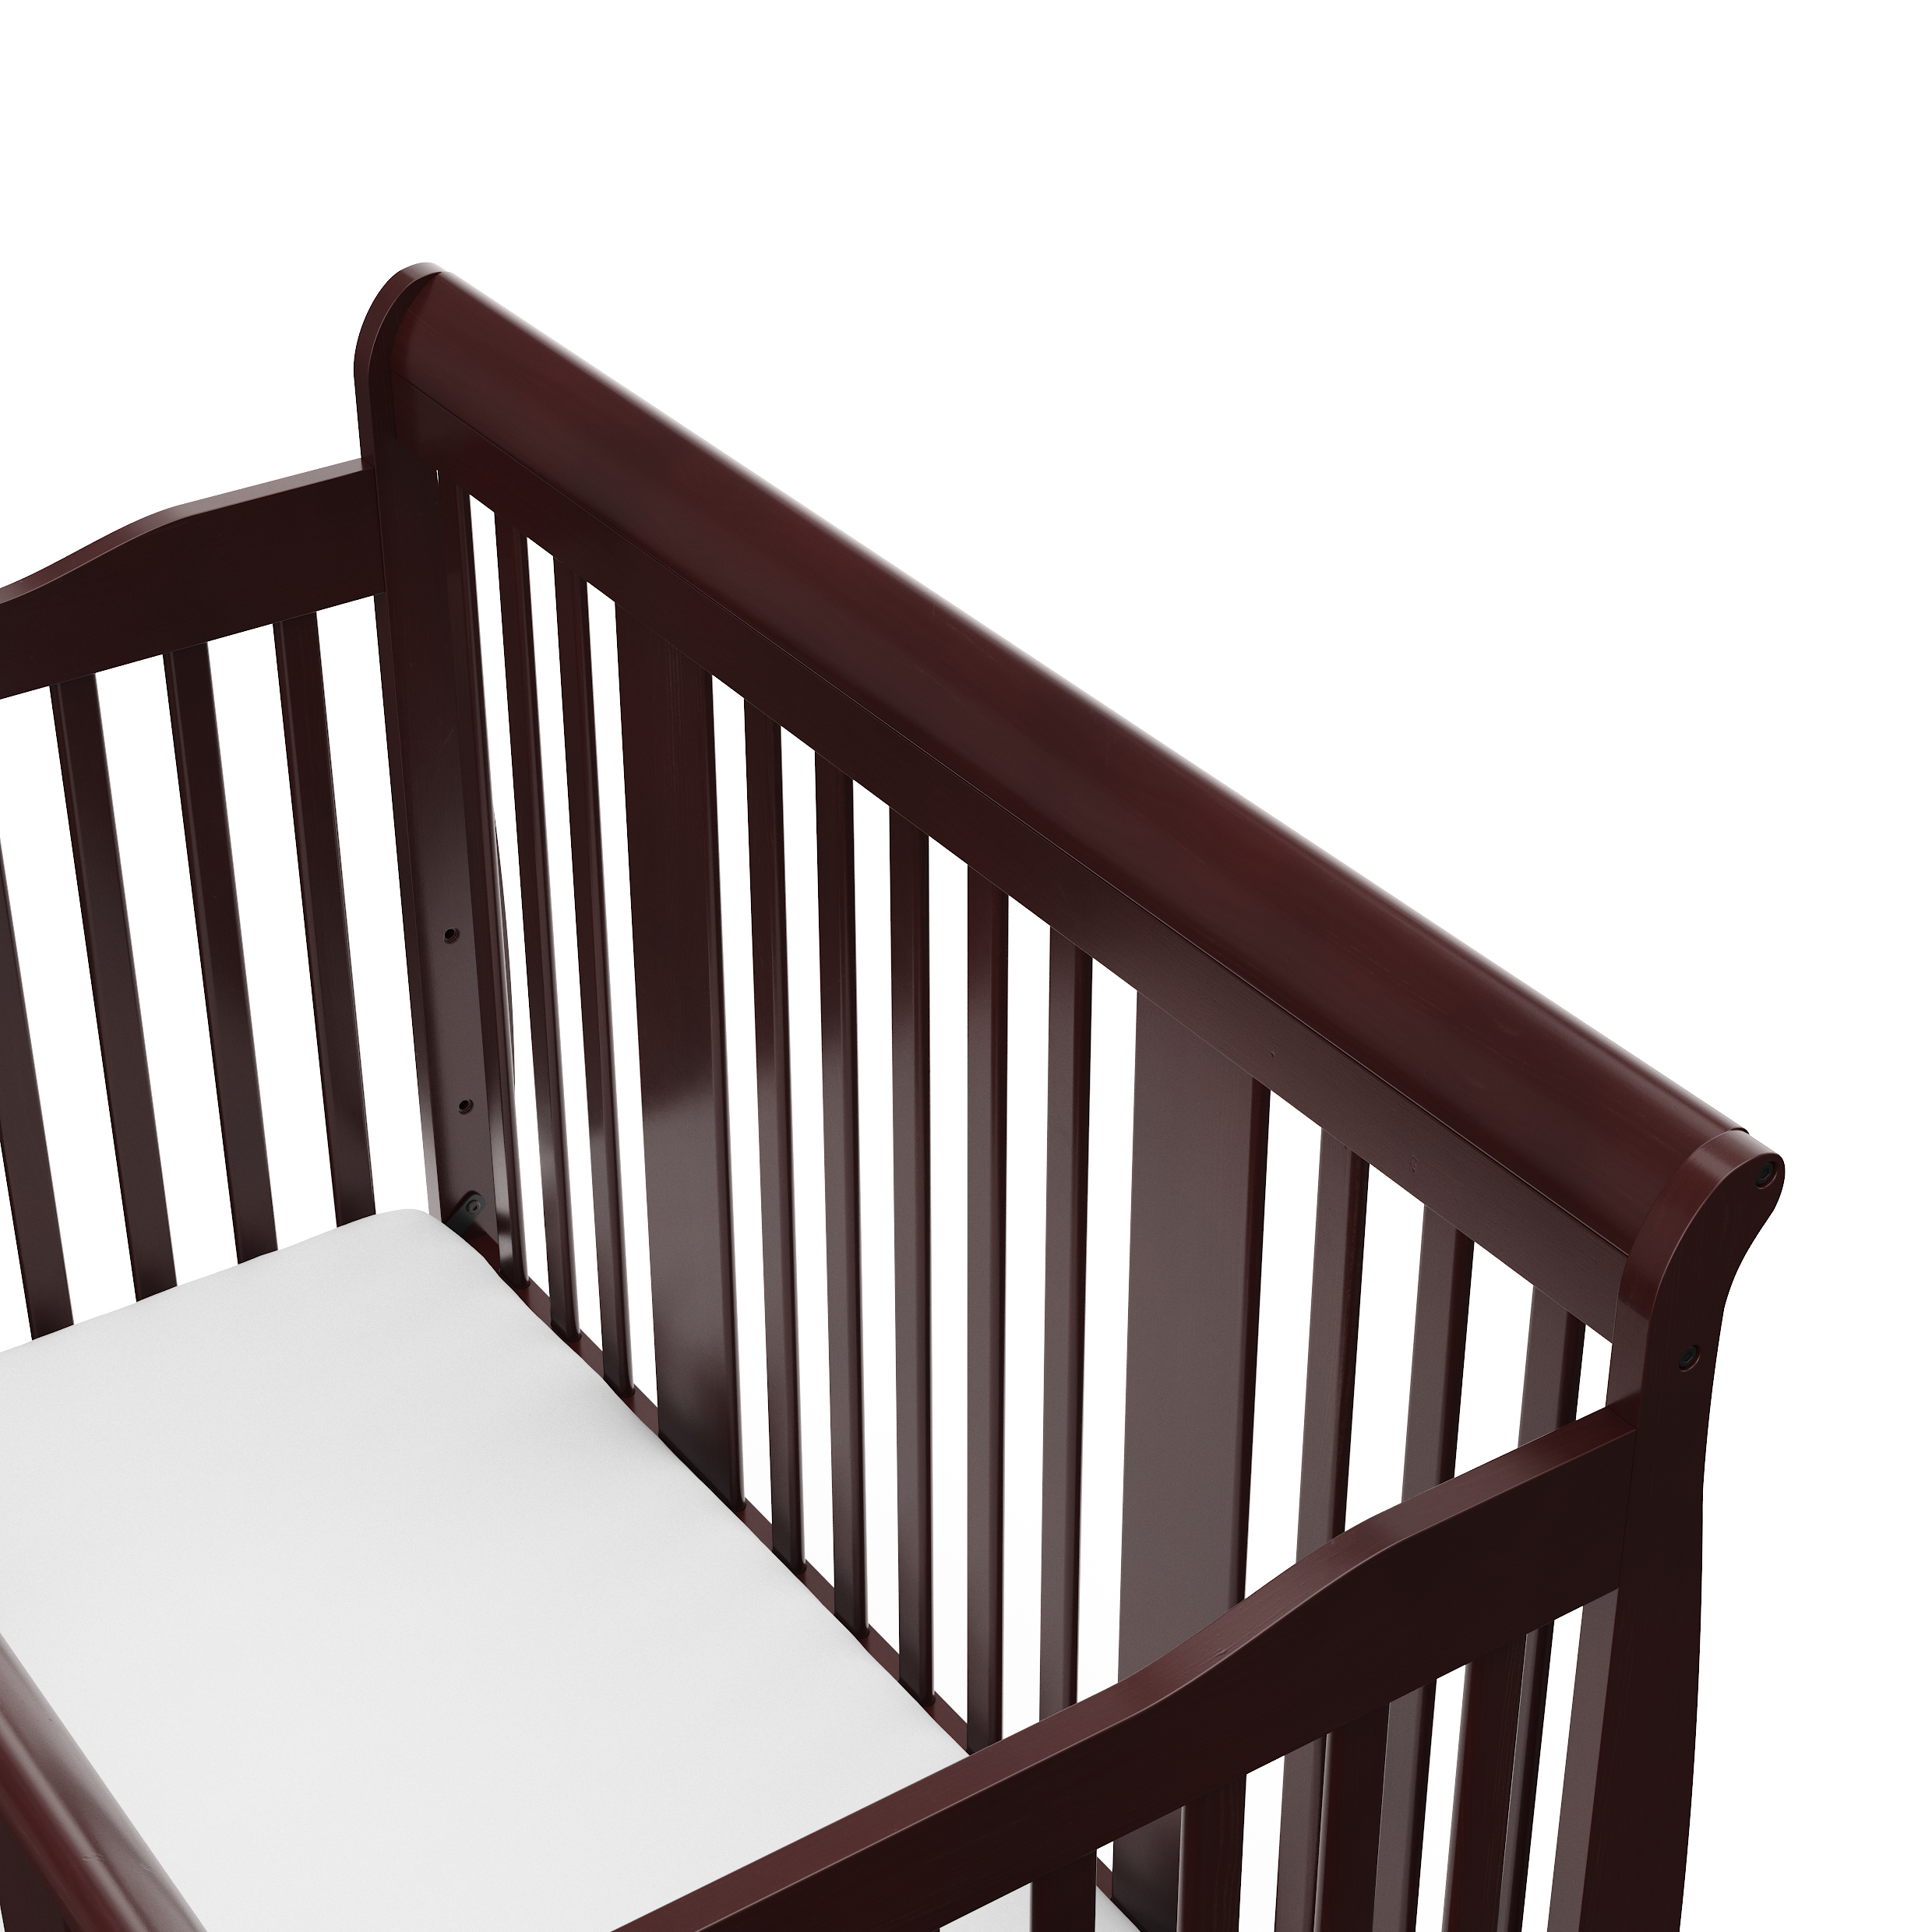 Storkcraft Tuscany 4-in-1 Convertible Baby Crib Espresso - image 4 of 9